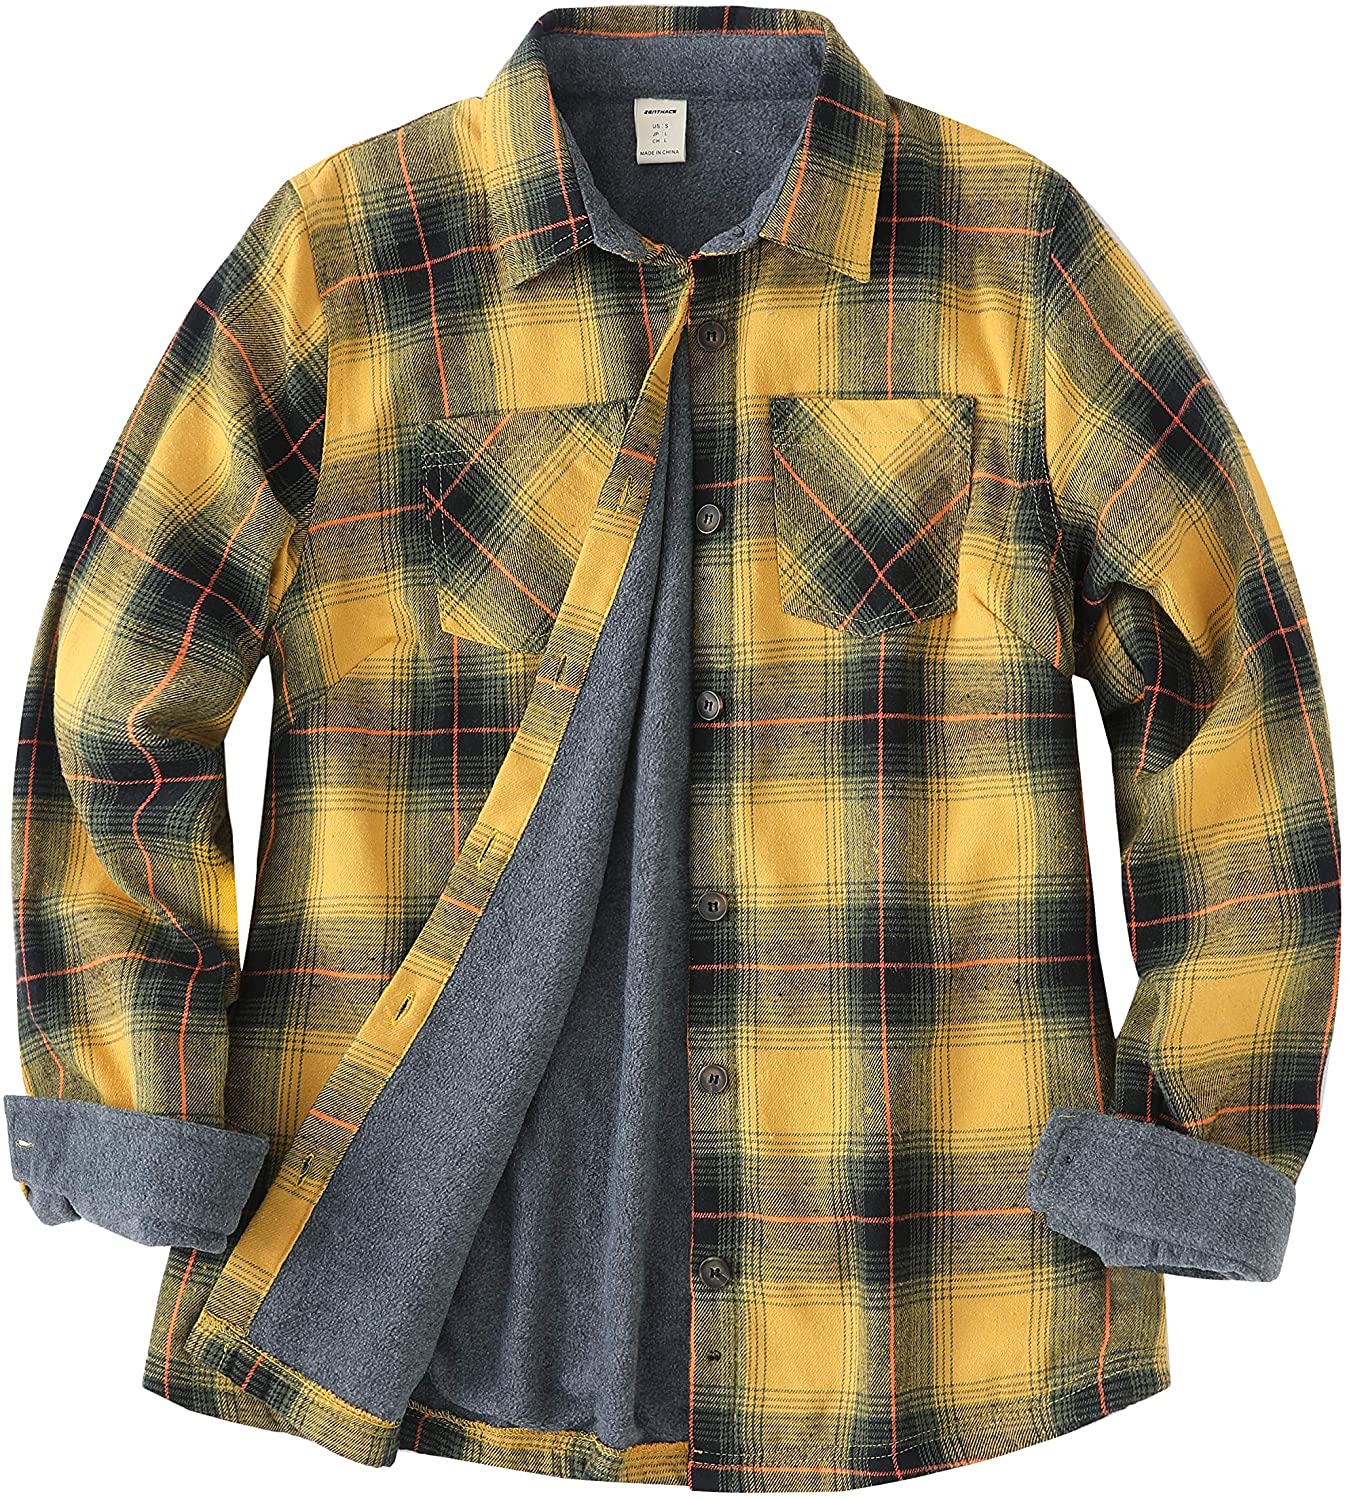 ZENTHACE Womens Thermal Fleece Lined Plaid Button Down Flannel Shirt Jacket 